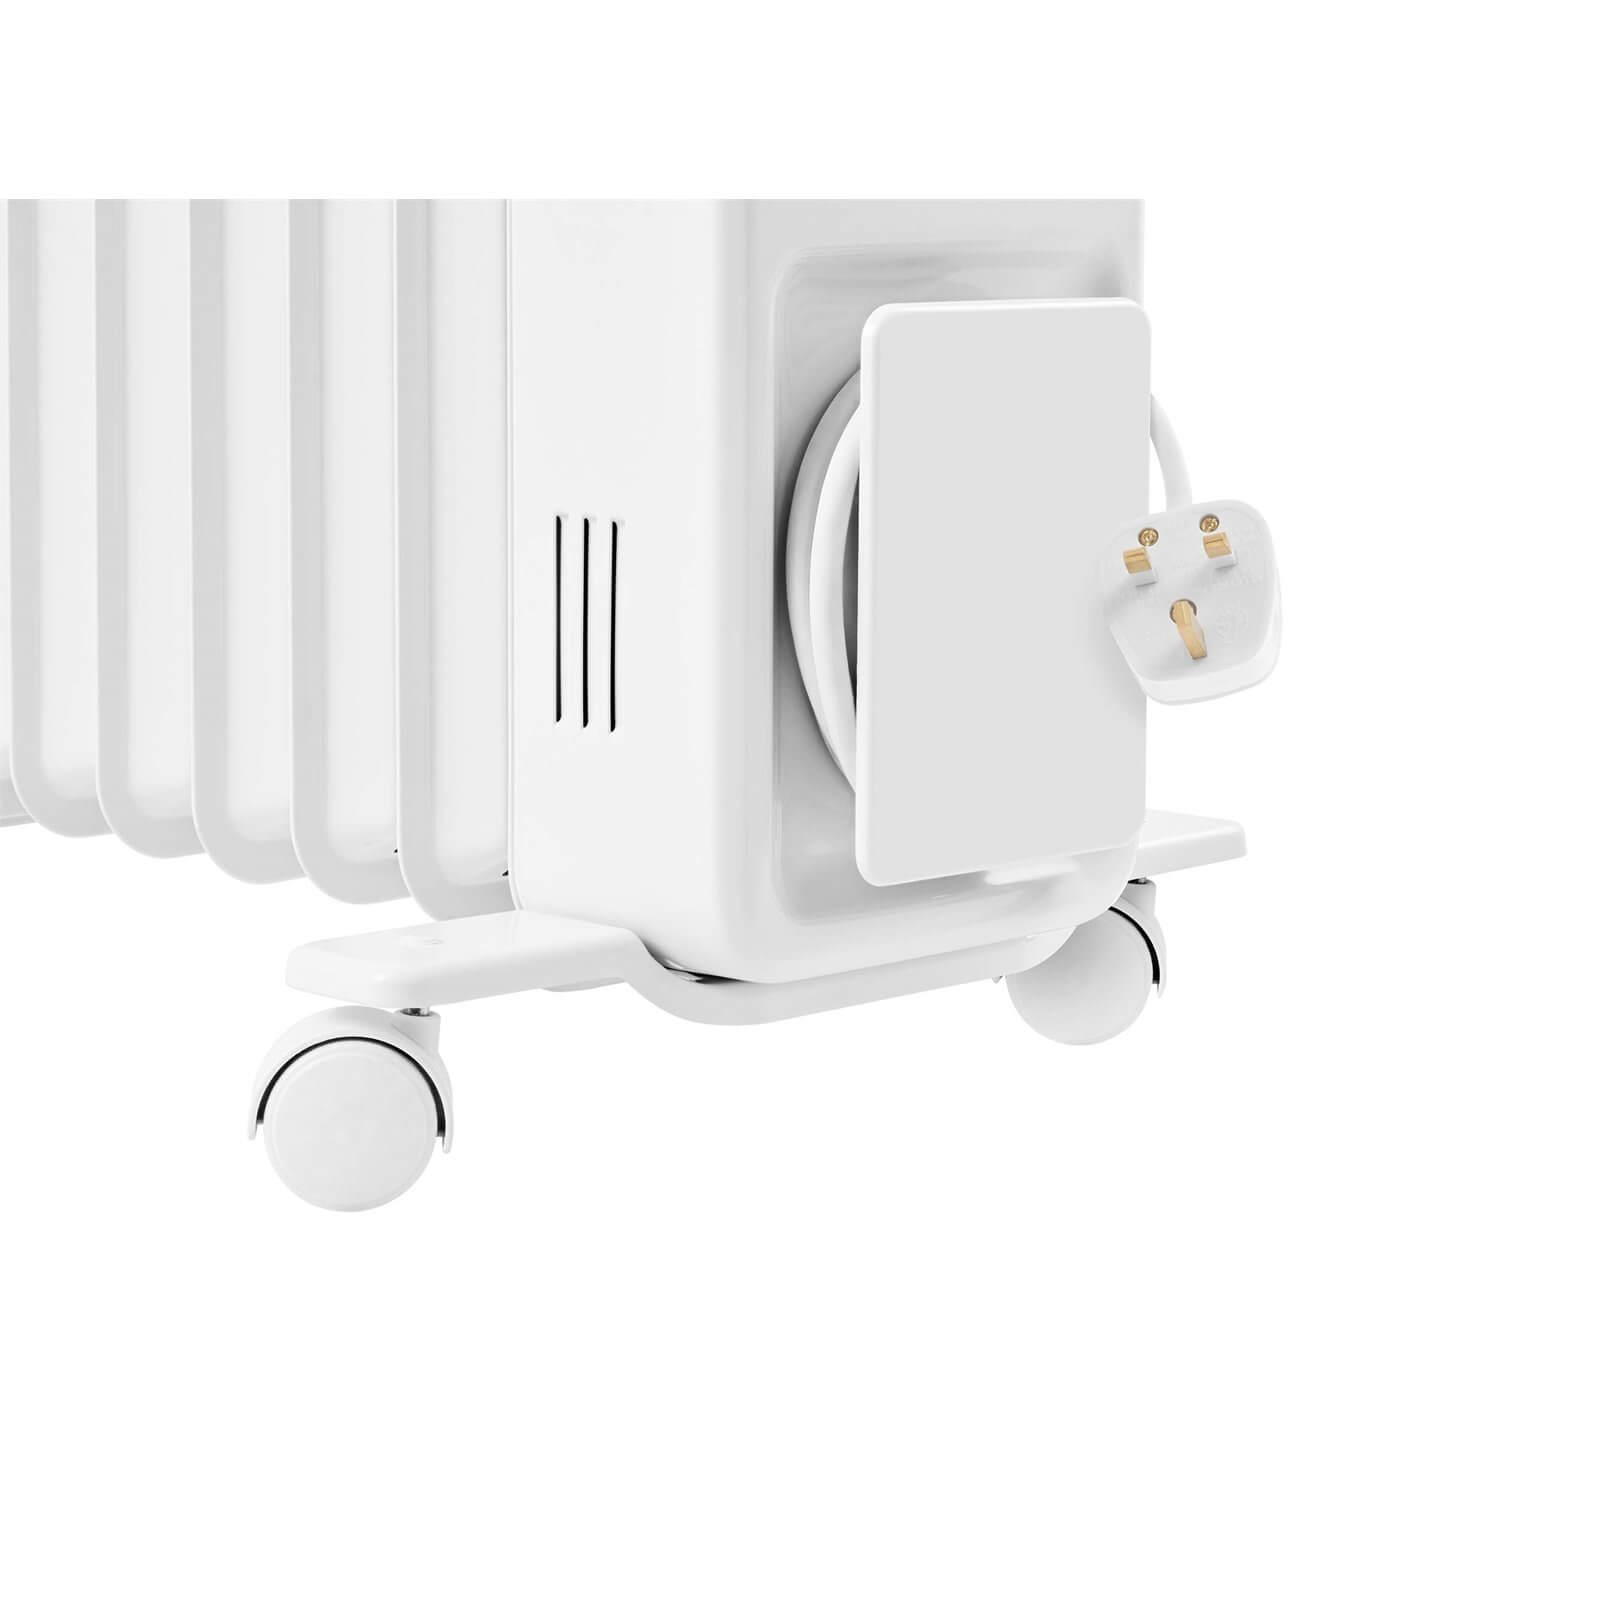 Dimplex 2kW Oil Free radiator with 24 hour timer - White